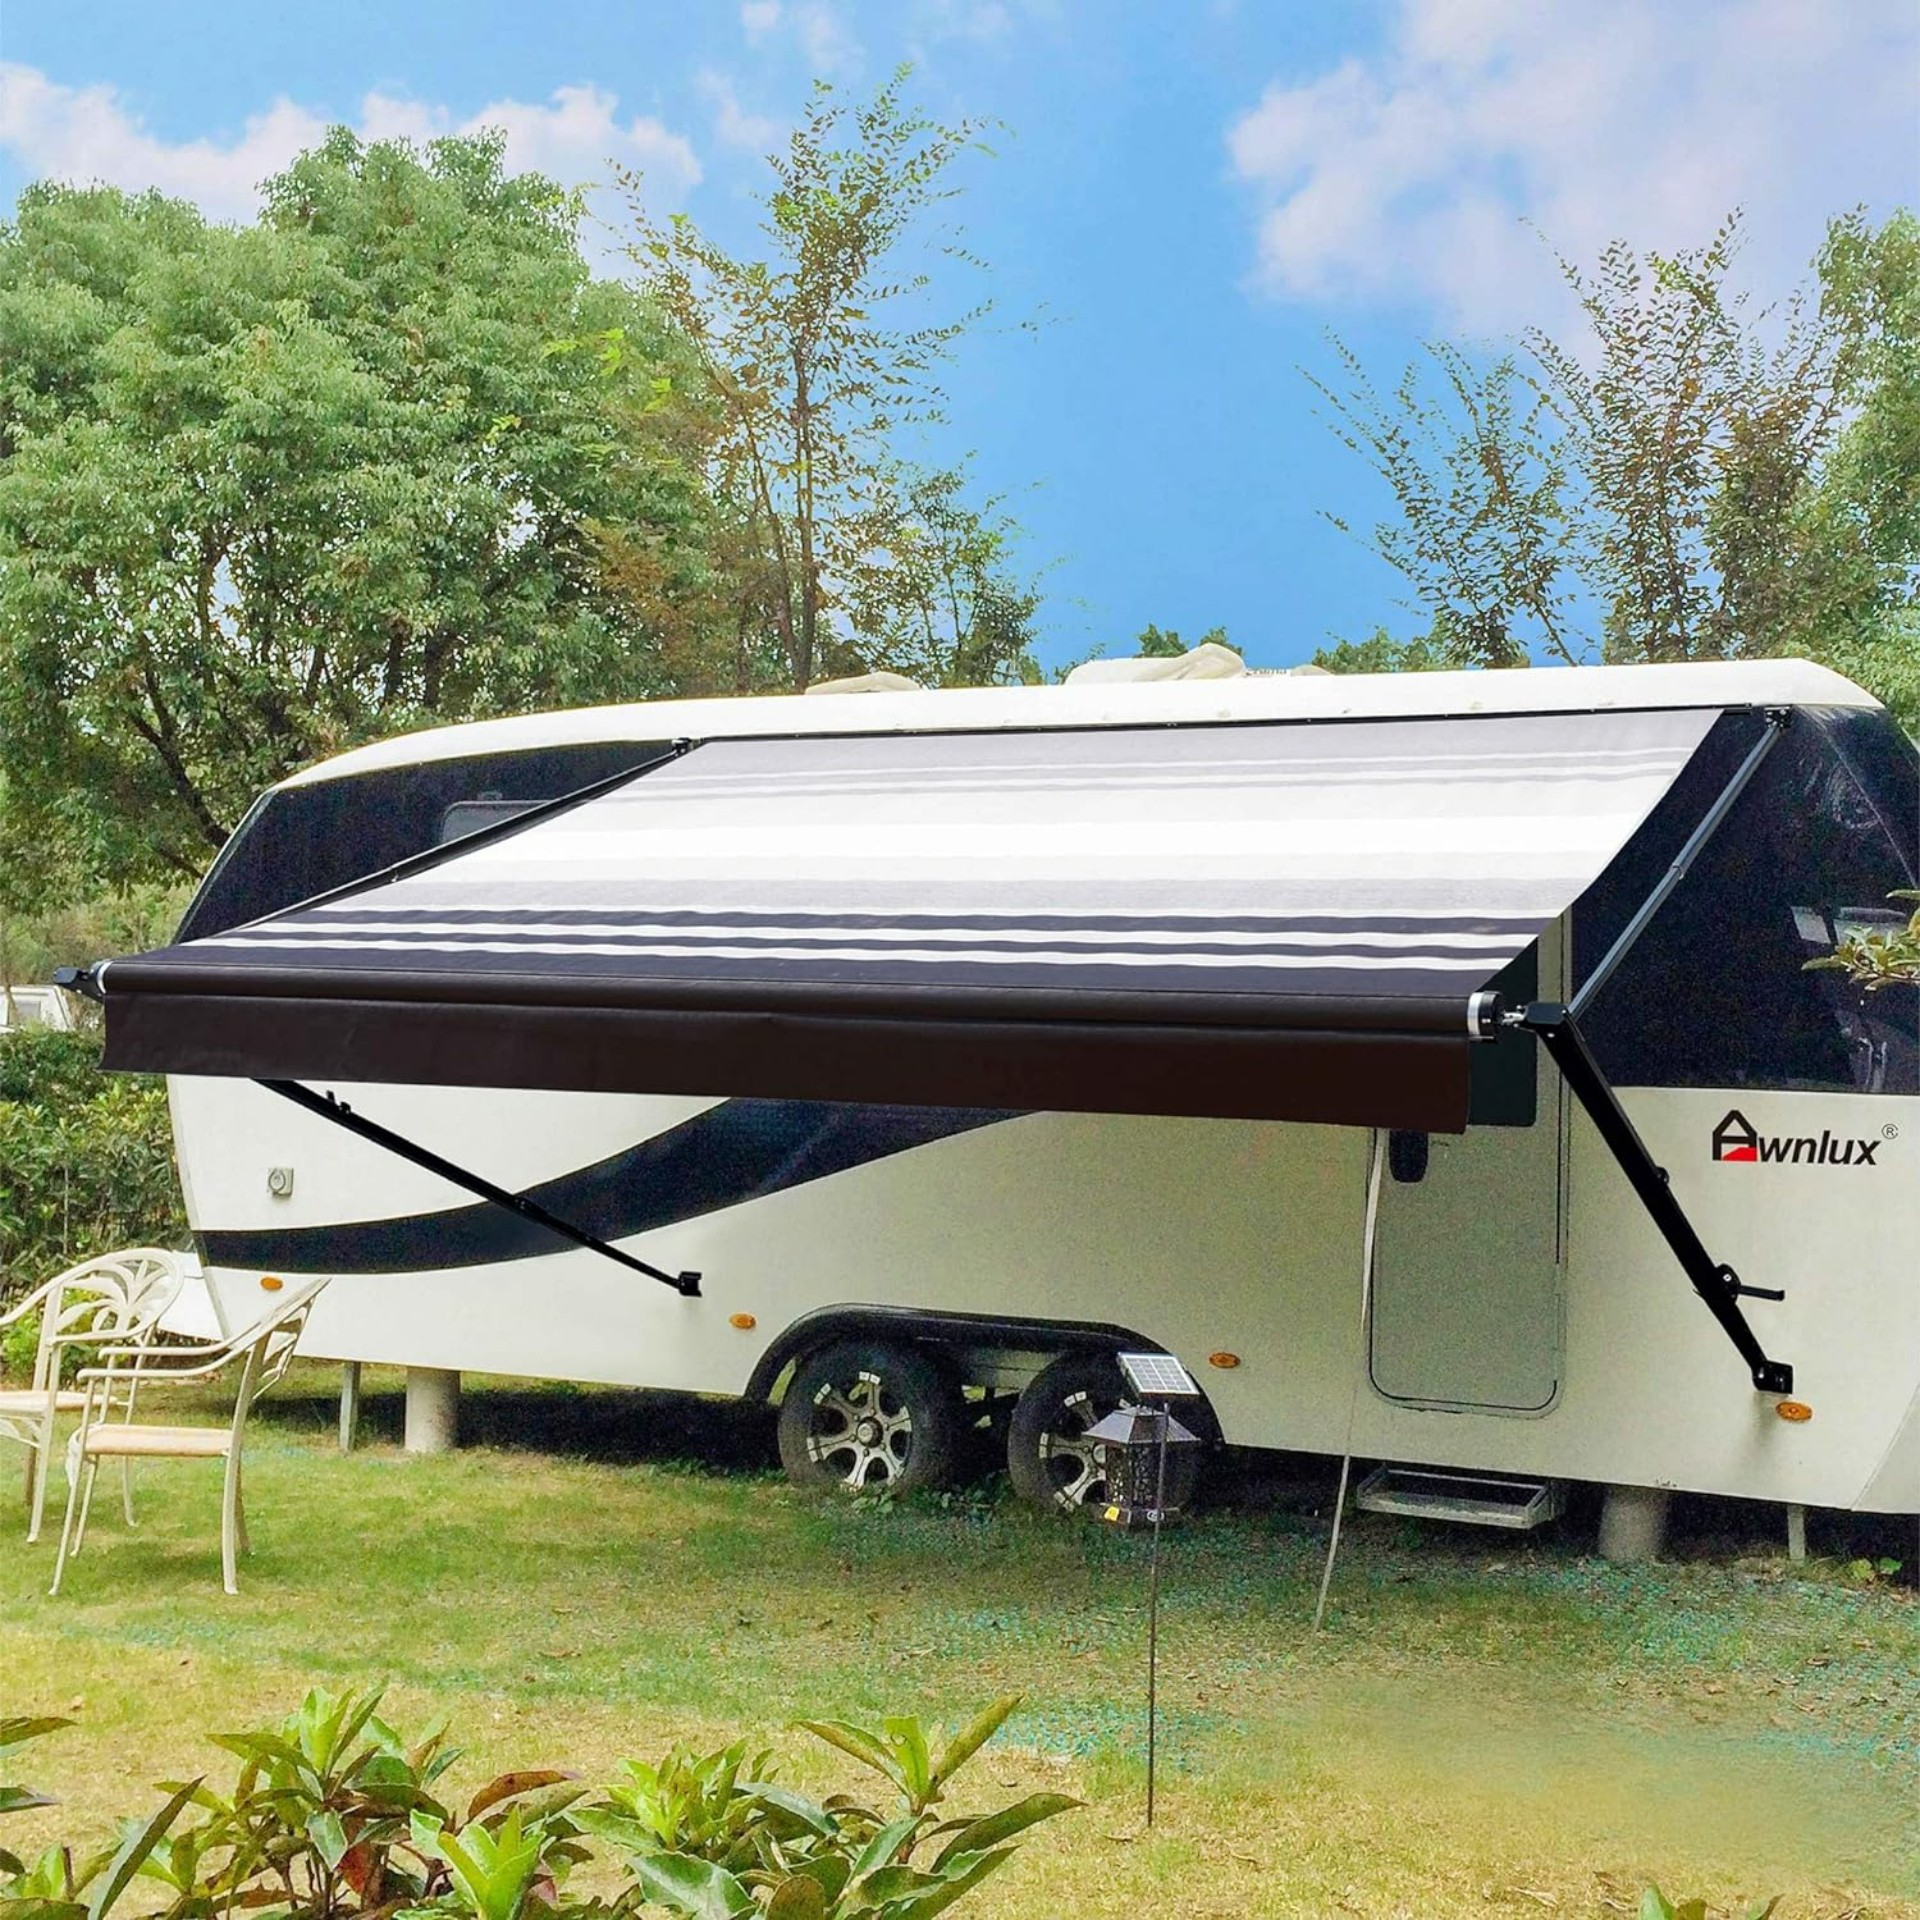 https://s1.cdn.autoevolution.com/images/news/gallery/10-must-have-camper-and-rv-accessories-for-your-next-epic-adventure_1.jpg